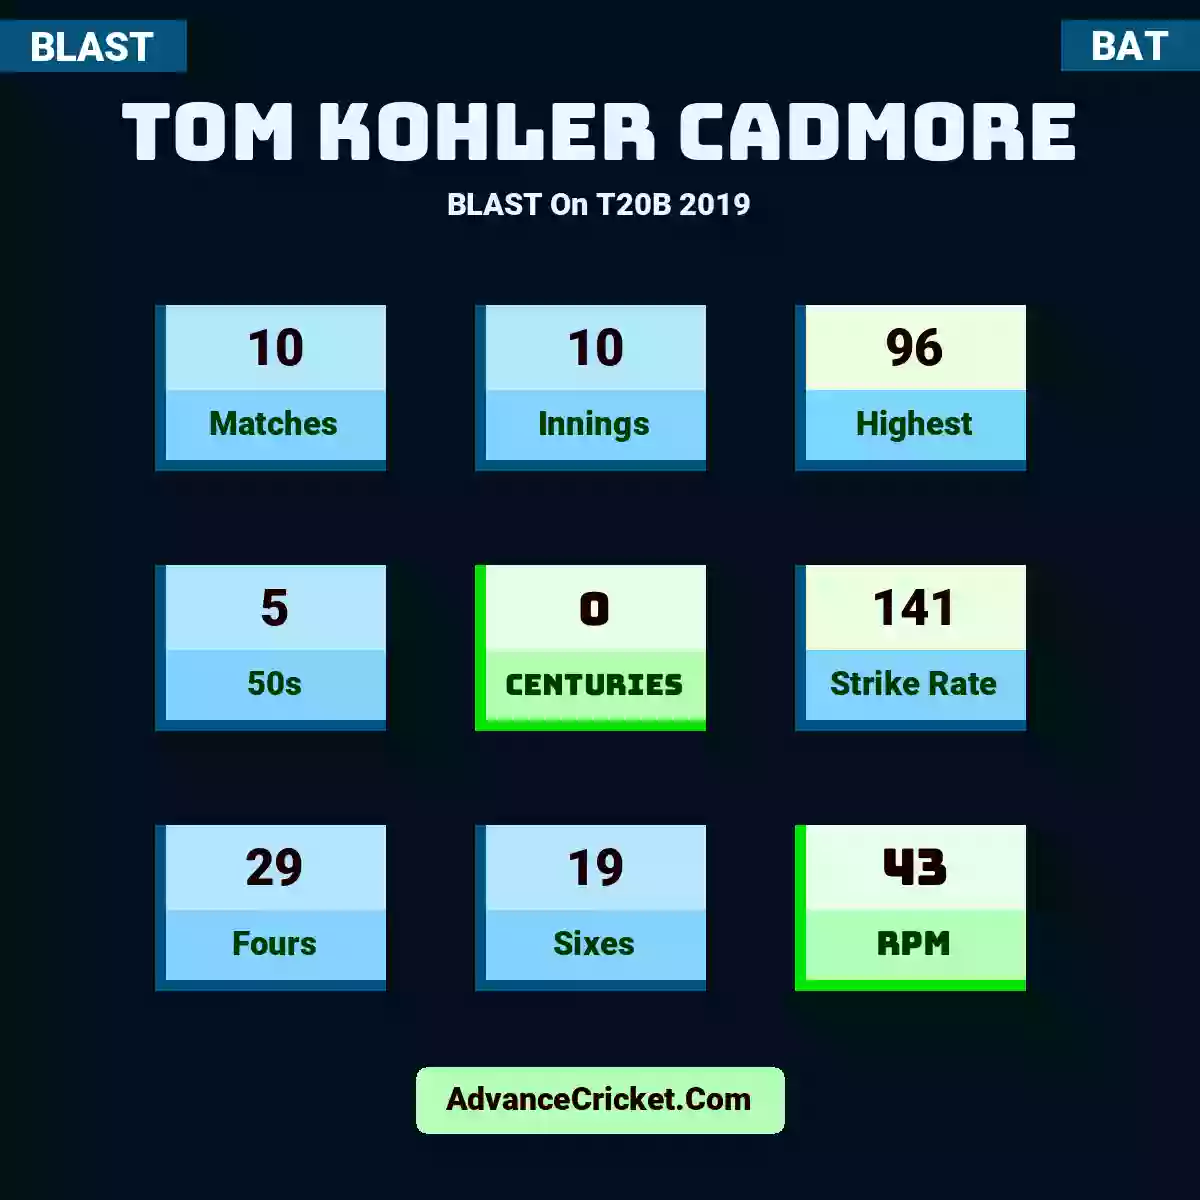 Tom Kohler Cadmore BLAST  On T20B 2019, Tom Kohler Cadmore played 10 matches, scored 96 runs as highest, 5 half-centuries, and 0 centuries, with a strike rate of 141. T.Cadmore hit 29 fours and 19 sixes, with an RPM of 43.